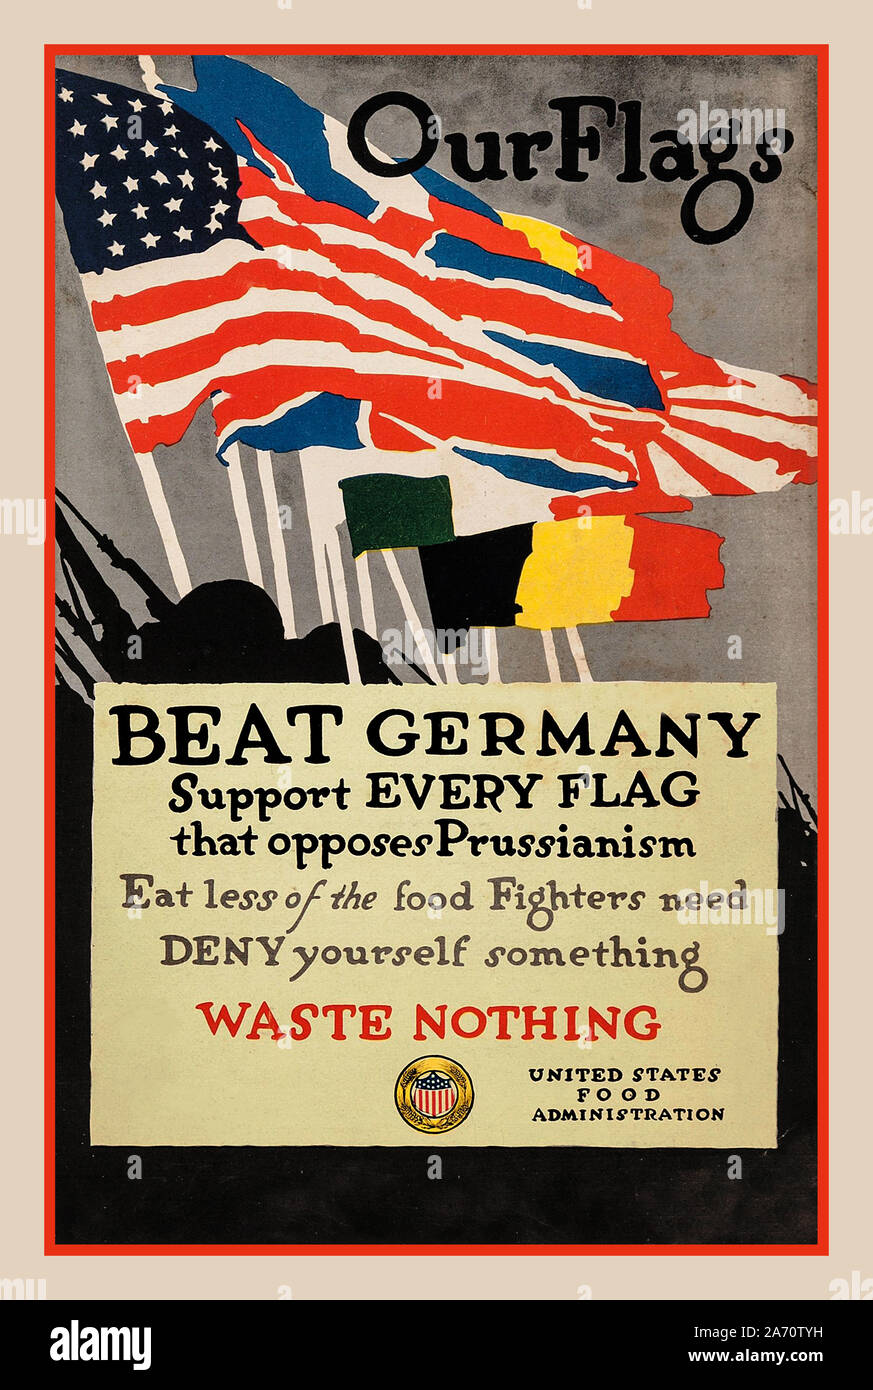 OUR FLAGS Vintage 1918 American WW1 World War I Propaganda Poster by Adolph Treidler for United States Food Administration, 1918  'Our Flags.'  Poster encouraged Americans to make sacrifices for the soldiers fighting in France and to support all countries who stood against the Kaiser. ‘BEAT GERMANY support every flag’ Stock Photo